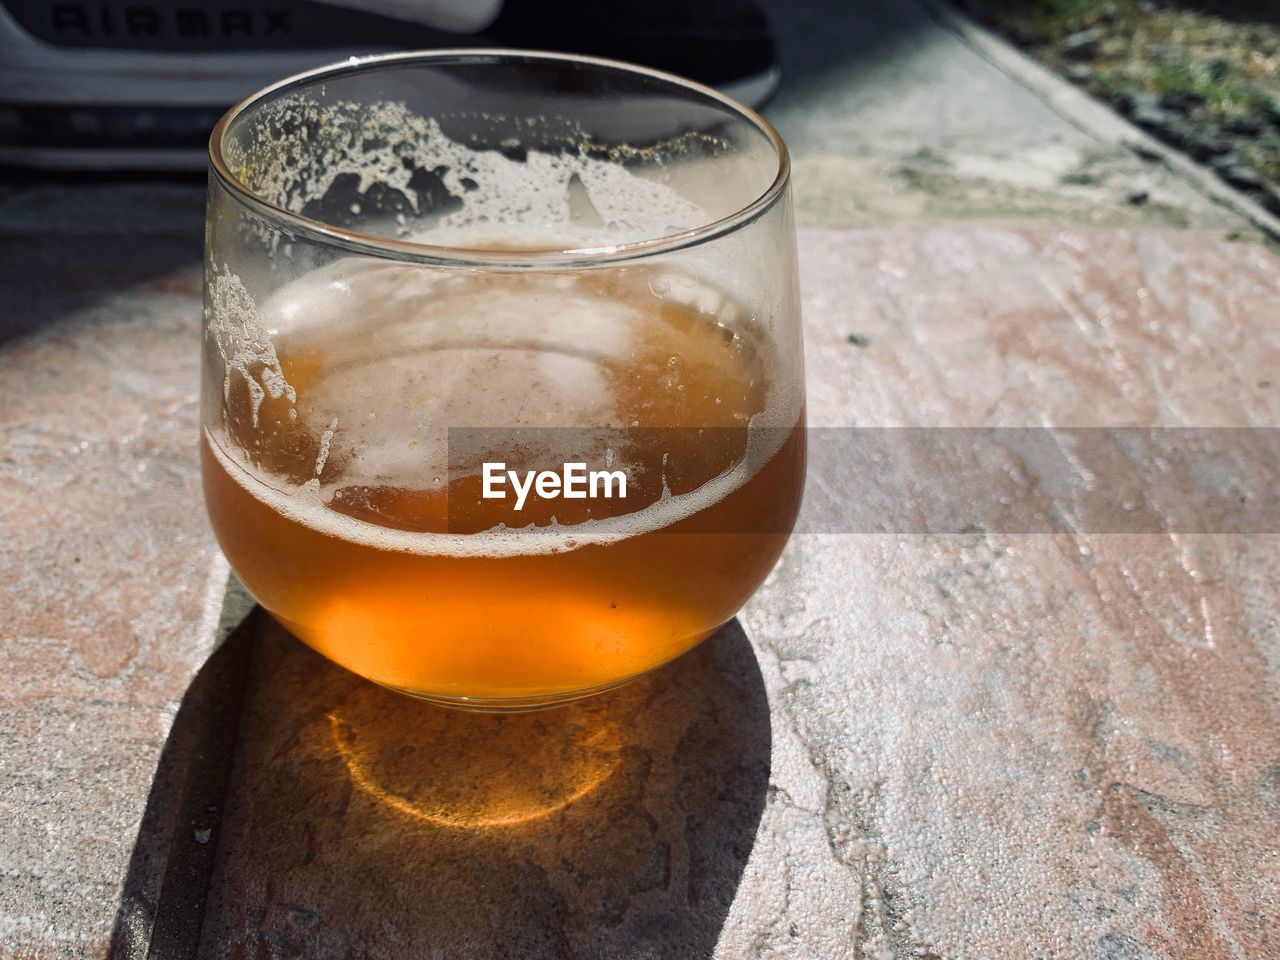 CLOSE-UP OF BEER ON GLASS TABLE